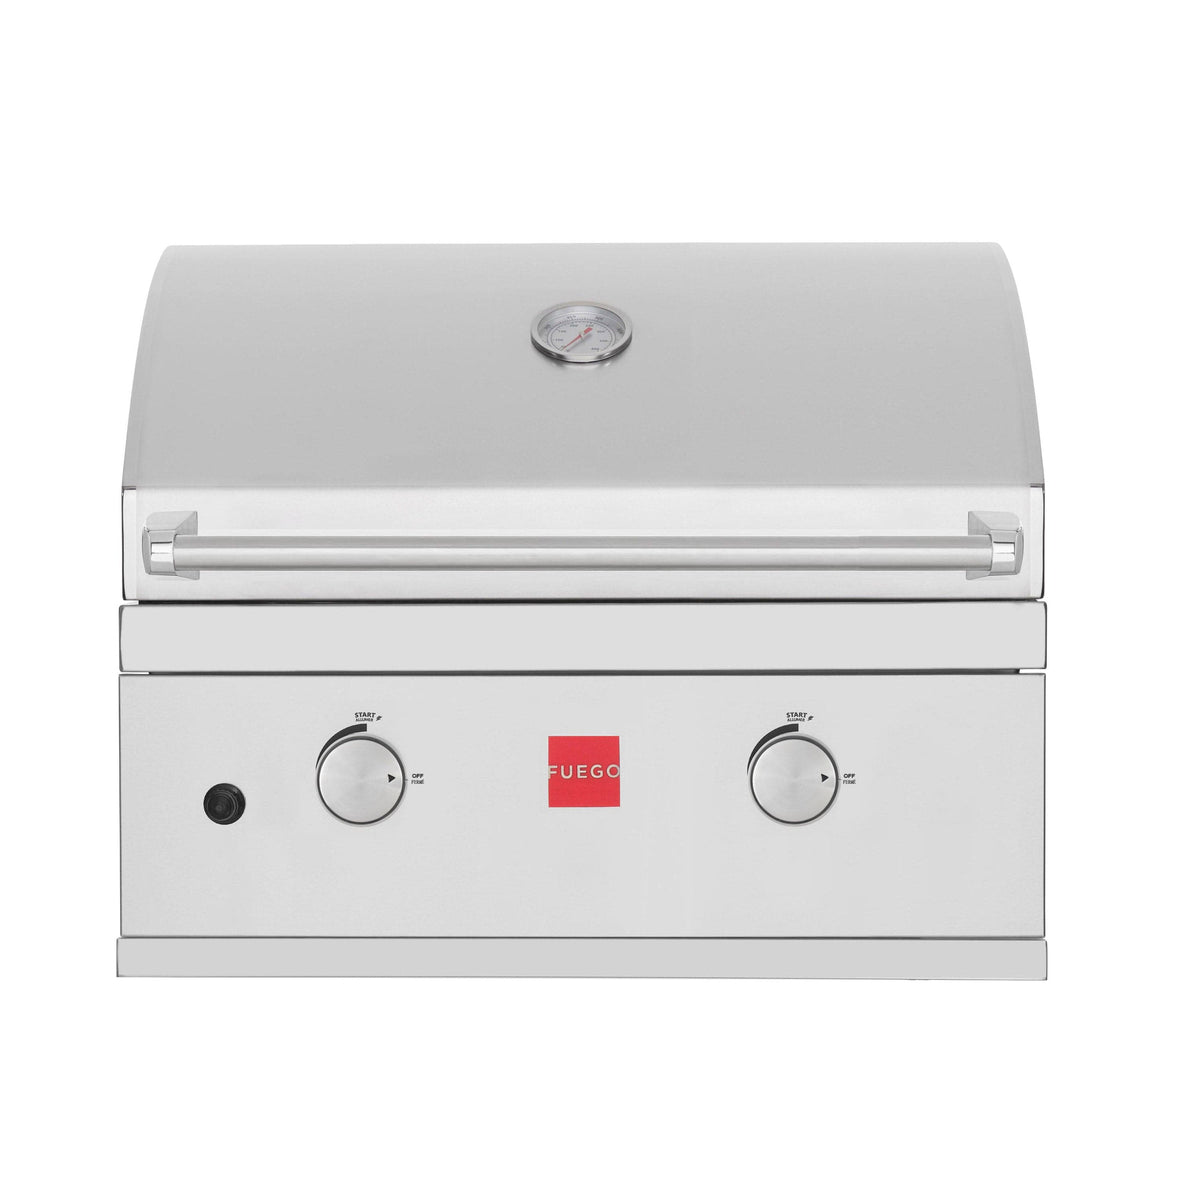 Fuego Grills Fuego 27” Built-In Gas Grill / Stainless Steel / F27S-B or F27S-B-NG